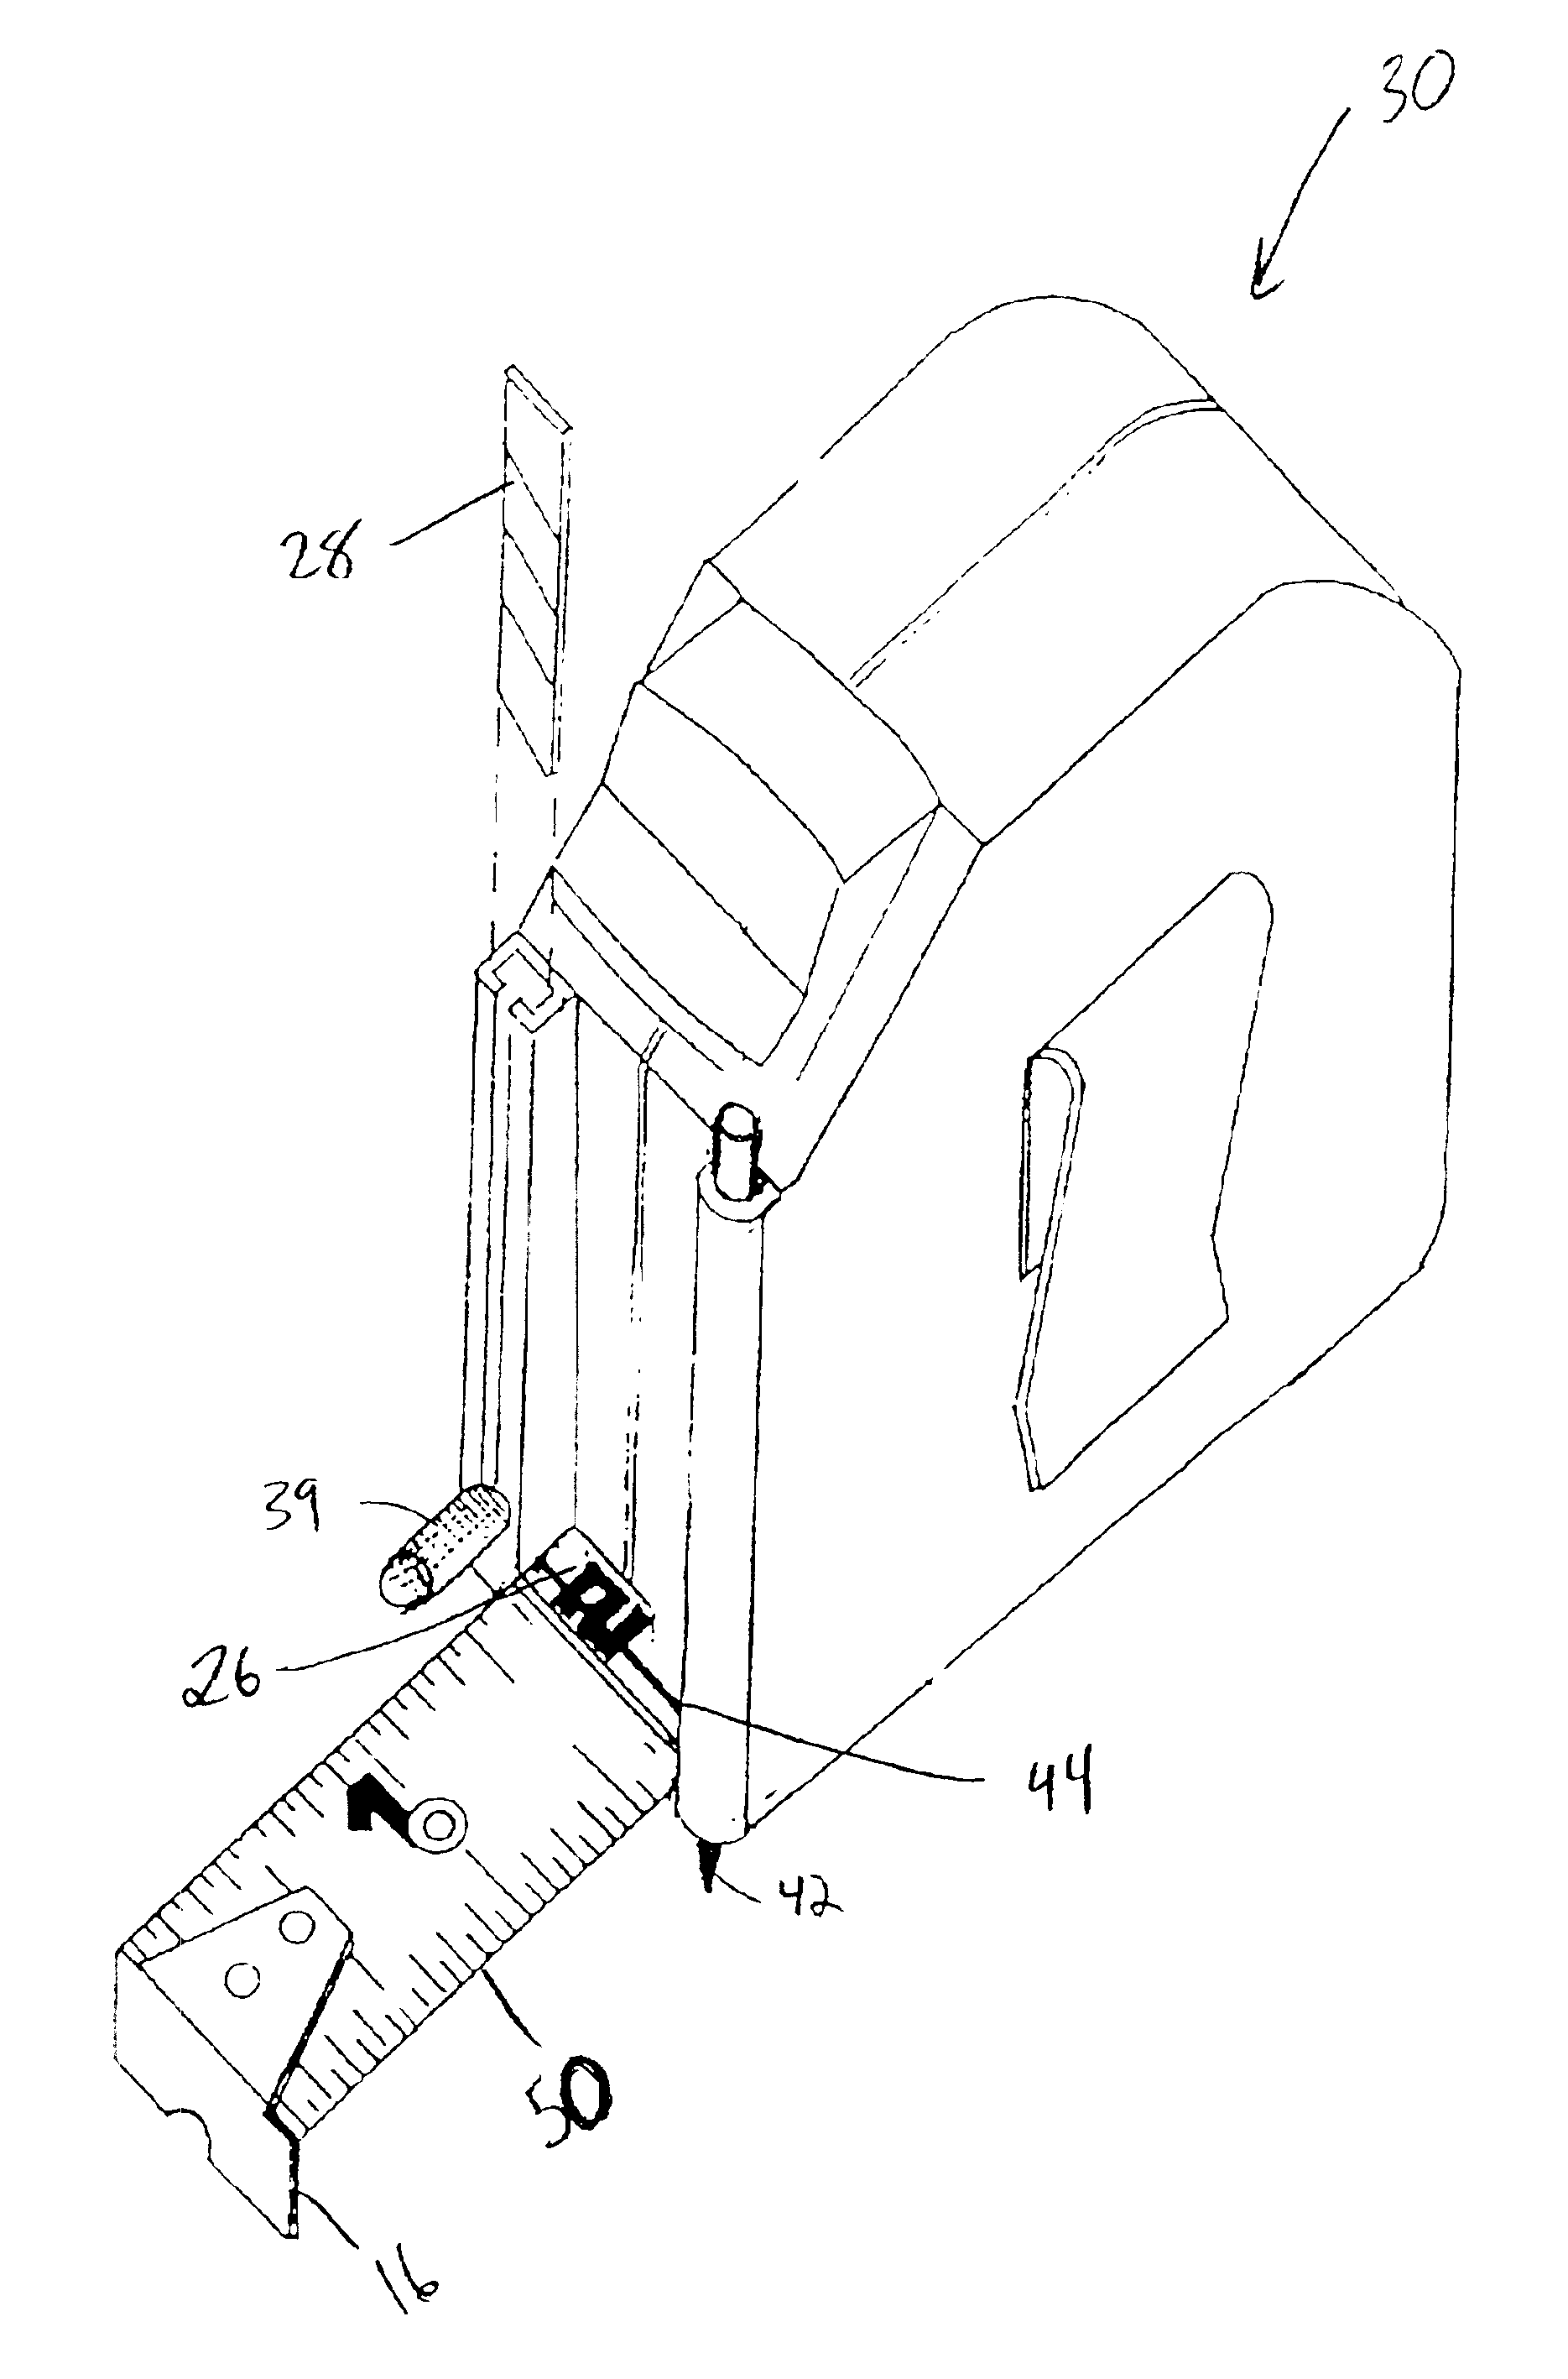 Device and method for making precise measurements and cuts with a measuring tape